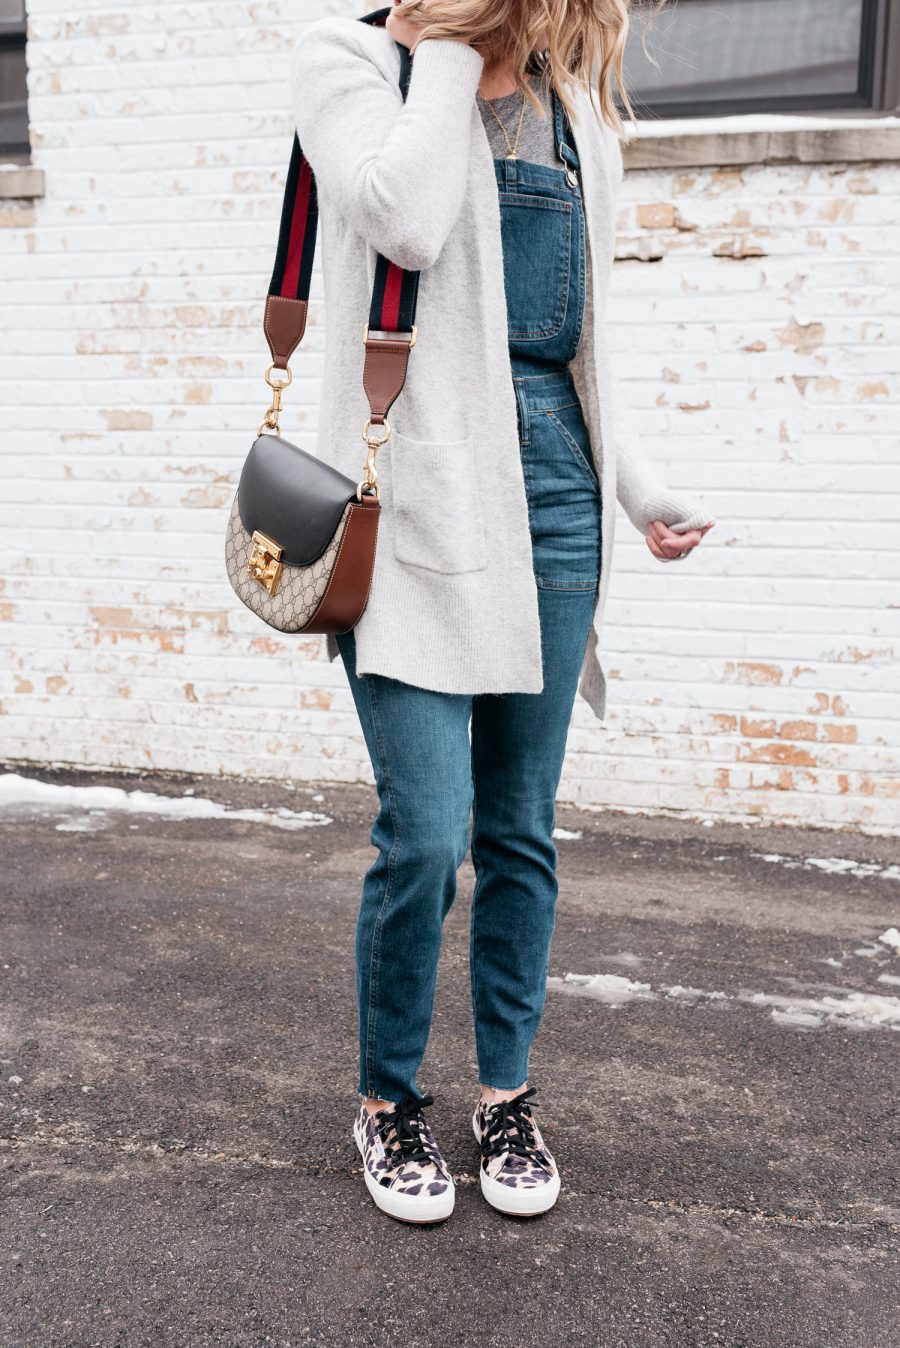 Overalls, cardigan, cross body bag, sneakers, and Palm coin necklace